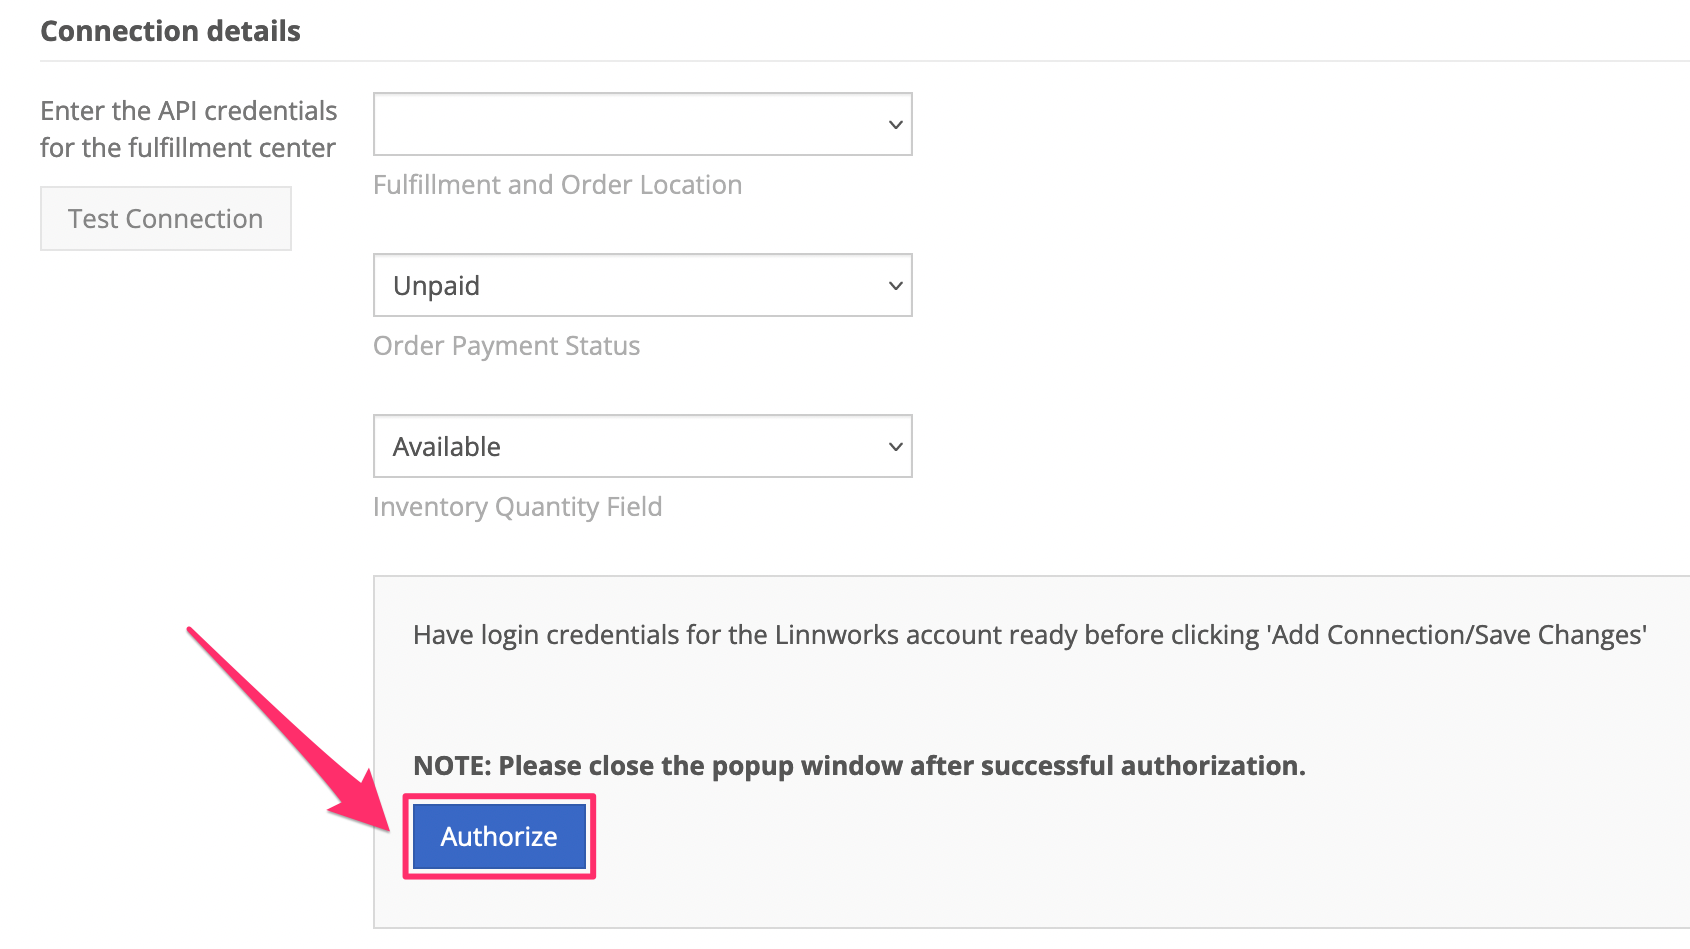 In the Linnworks connection details, click Authorize.